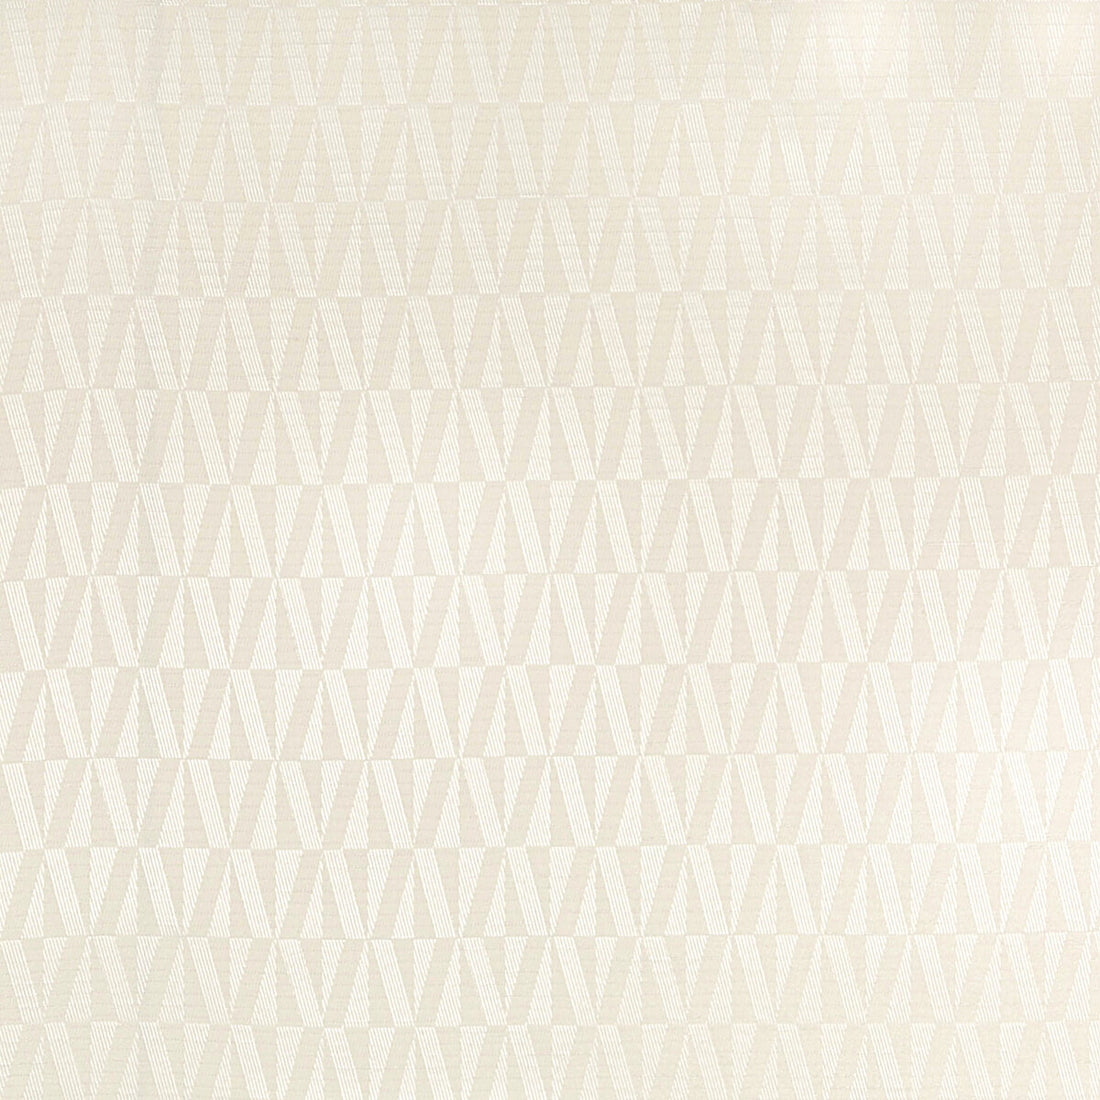 Payton fabric in papyrus color - pattern 4656.1.0 - by Kravet Contract